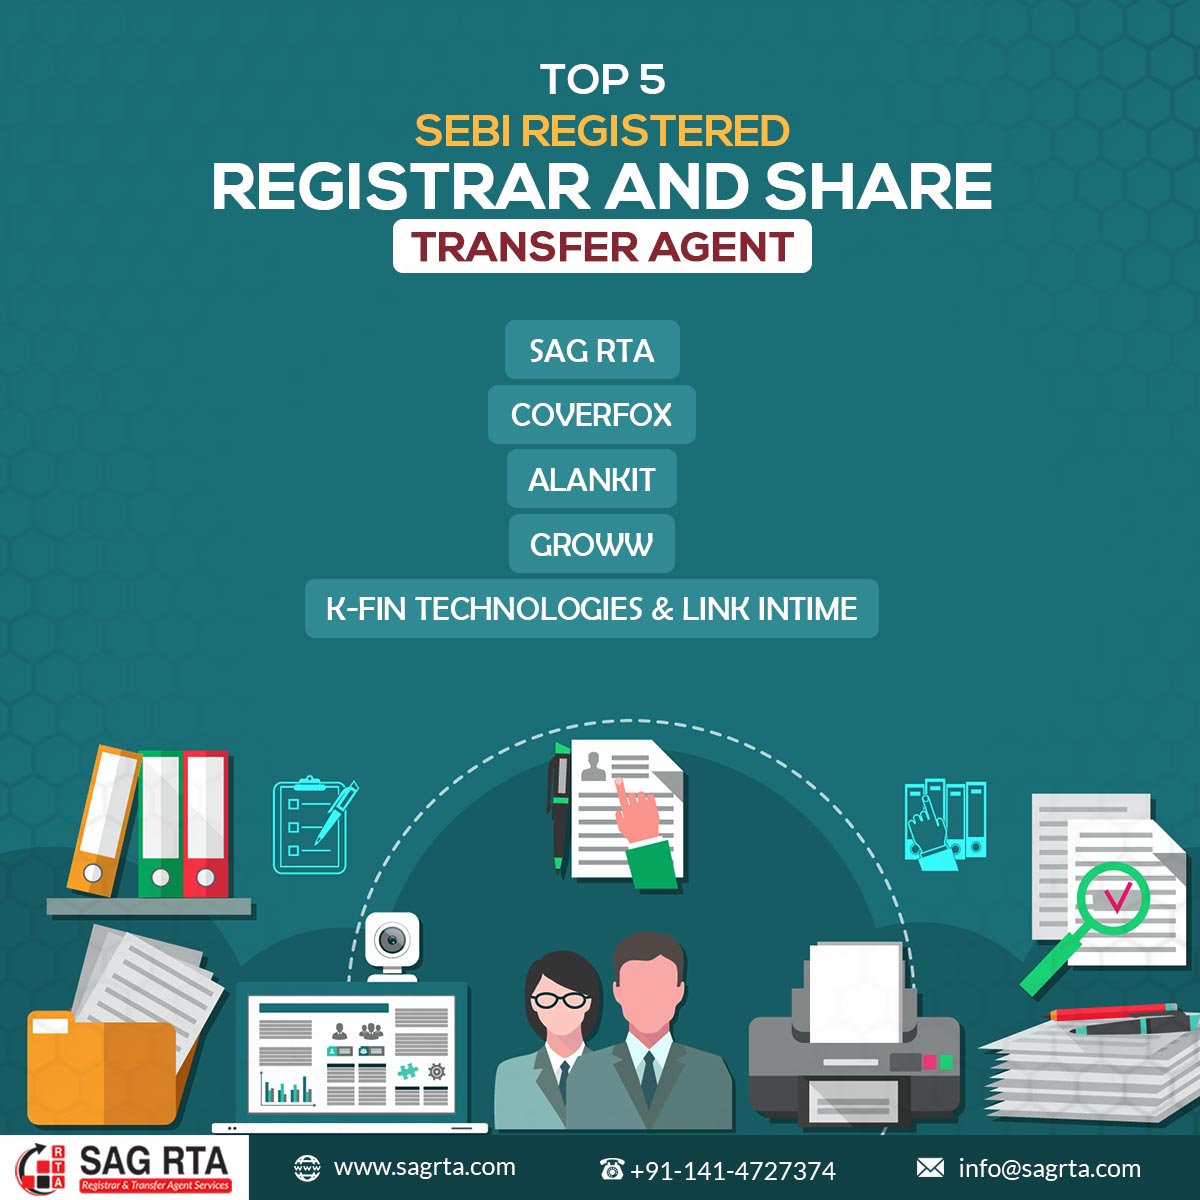 You can visit the Top 5 SEBI Registered RTA website to find all the details per your requirements.
bit.ly/3KQDS90
#registrarandtransferagent #Registrarandsharetransferagent #rtaservices #rtaagent #rtaforms #rtaIndia #investors #mutualfunds #shares #SEBI #CDSL #NSDL